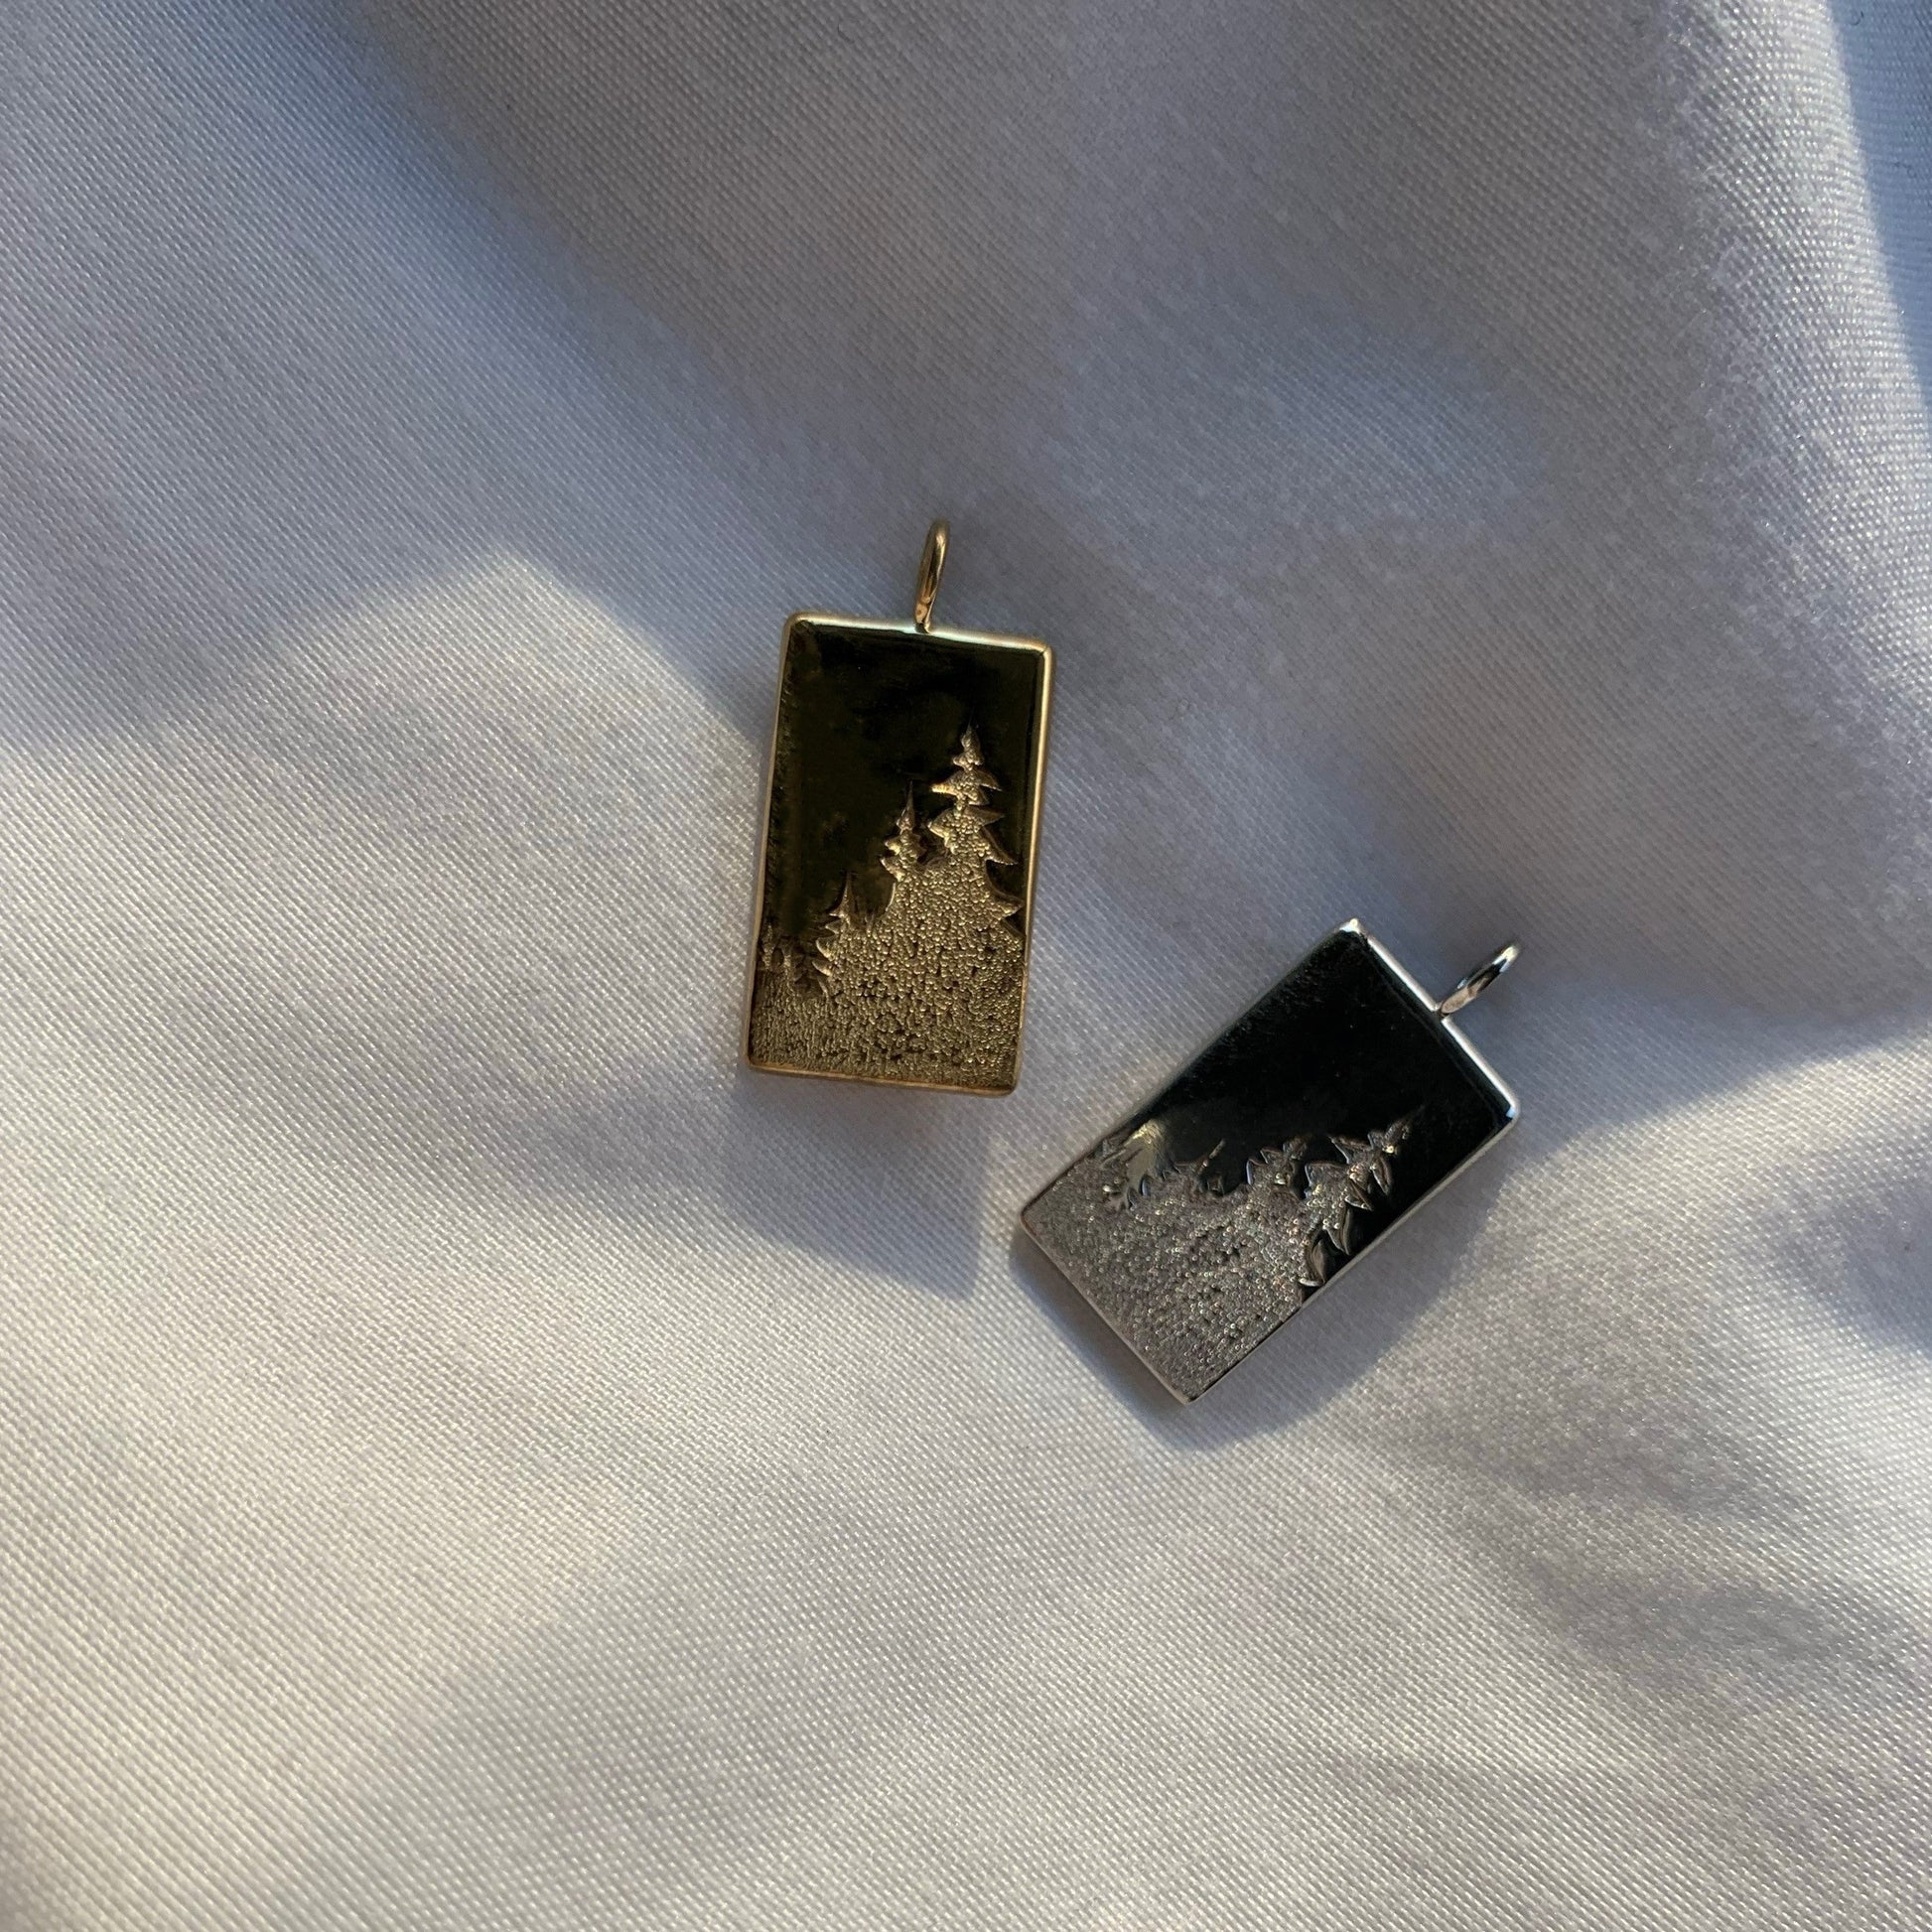 Rochelle Revelstoke Pendants Silver with Gold and Rhodium Plate on cloth